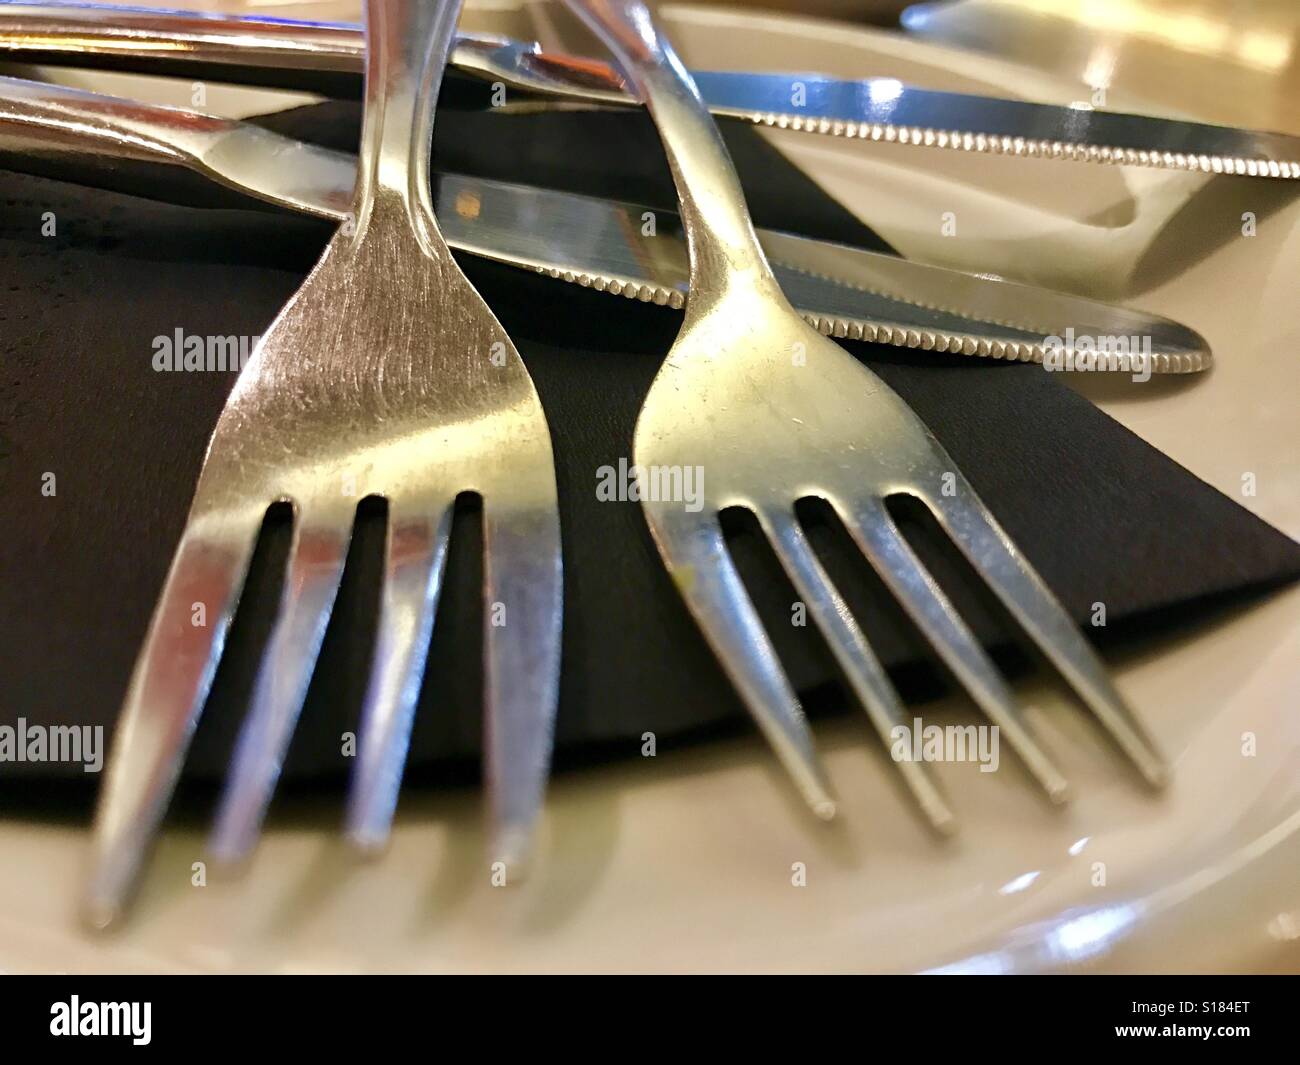 Two forks on a dish. Close view. Stock Photo